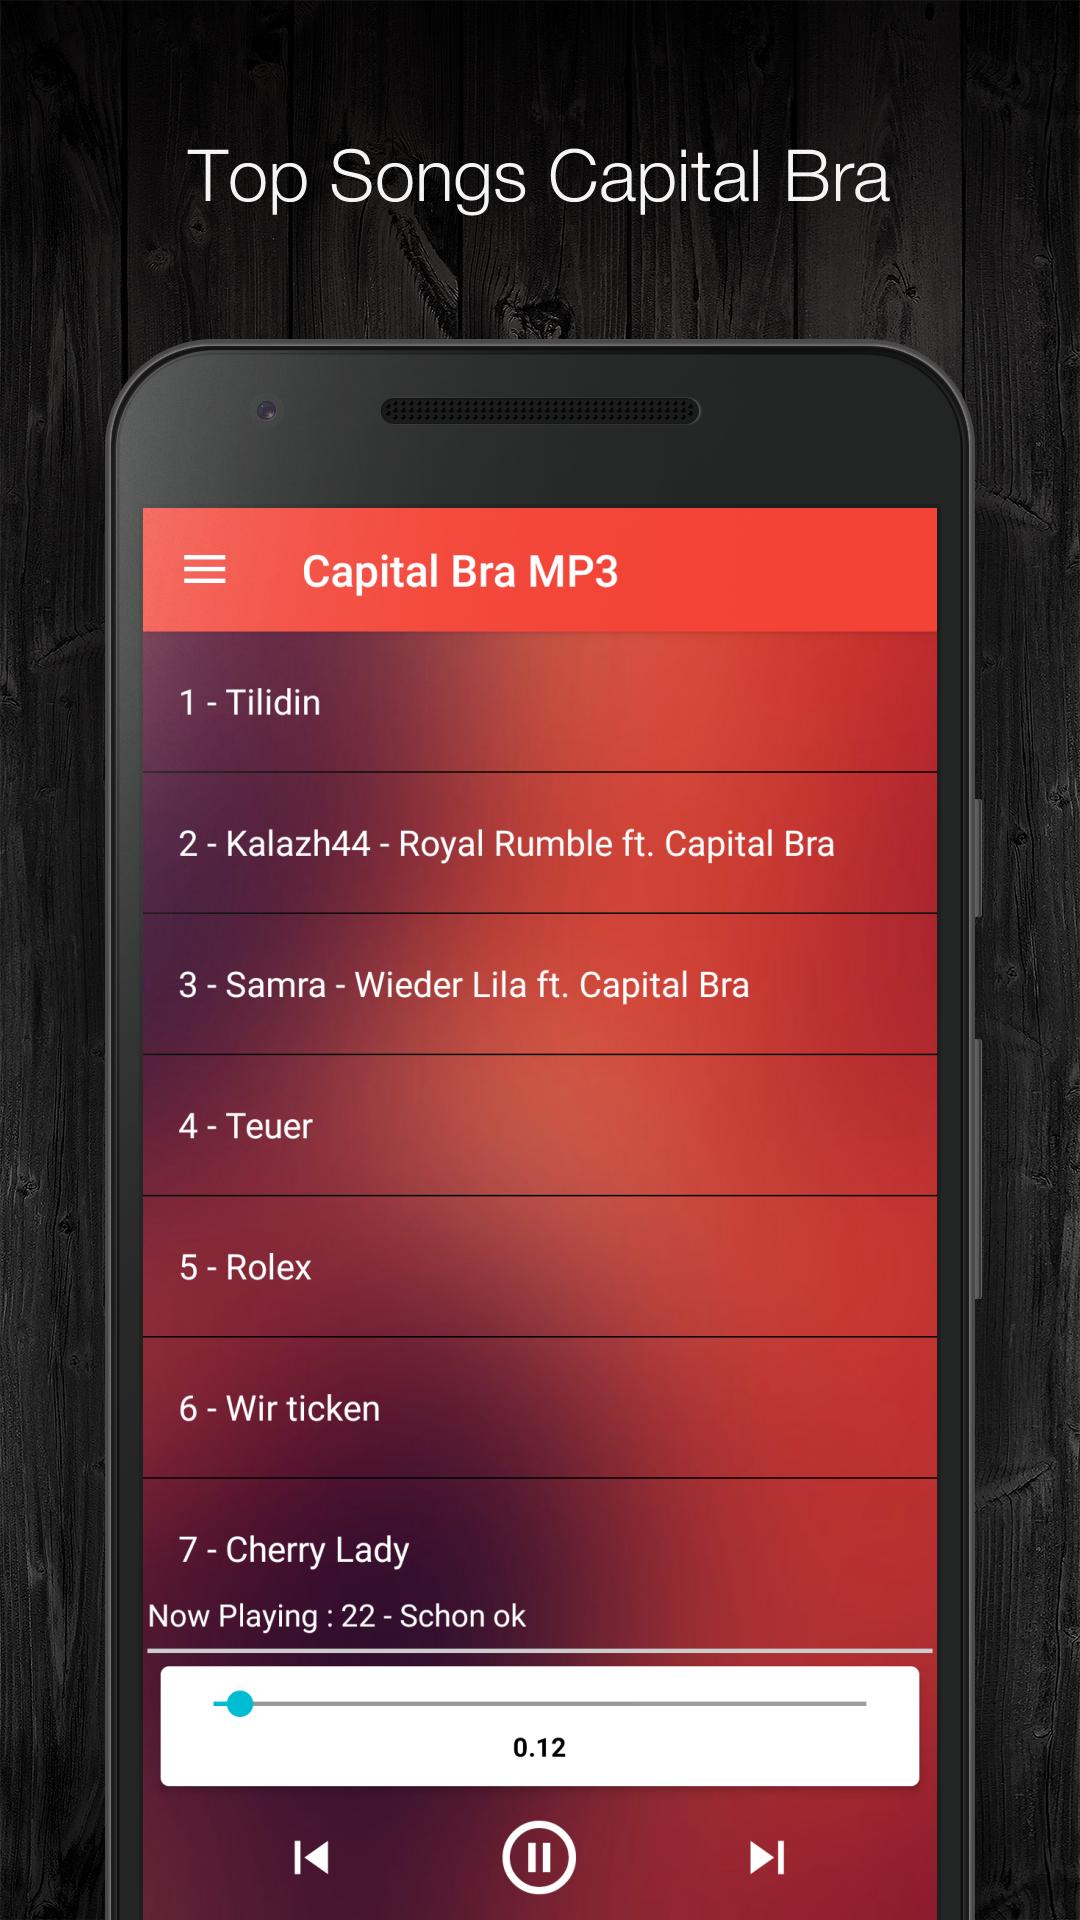 Capital Bra Songs 2019 for Android - APK Download